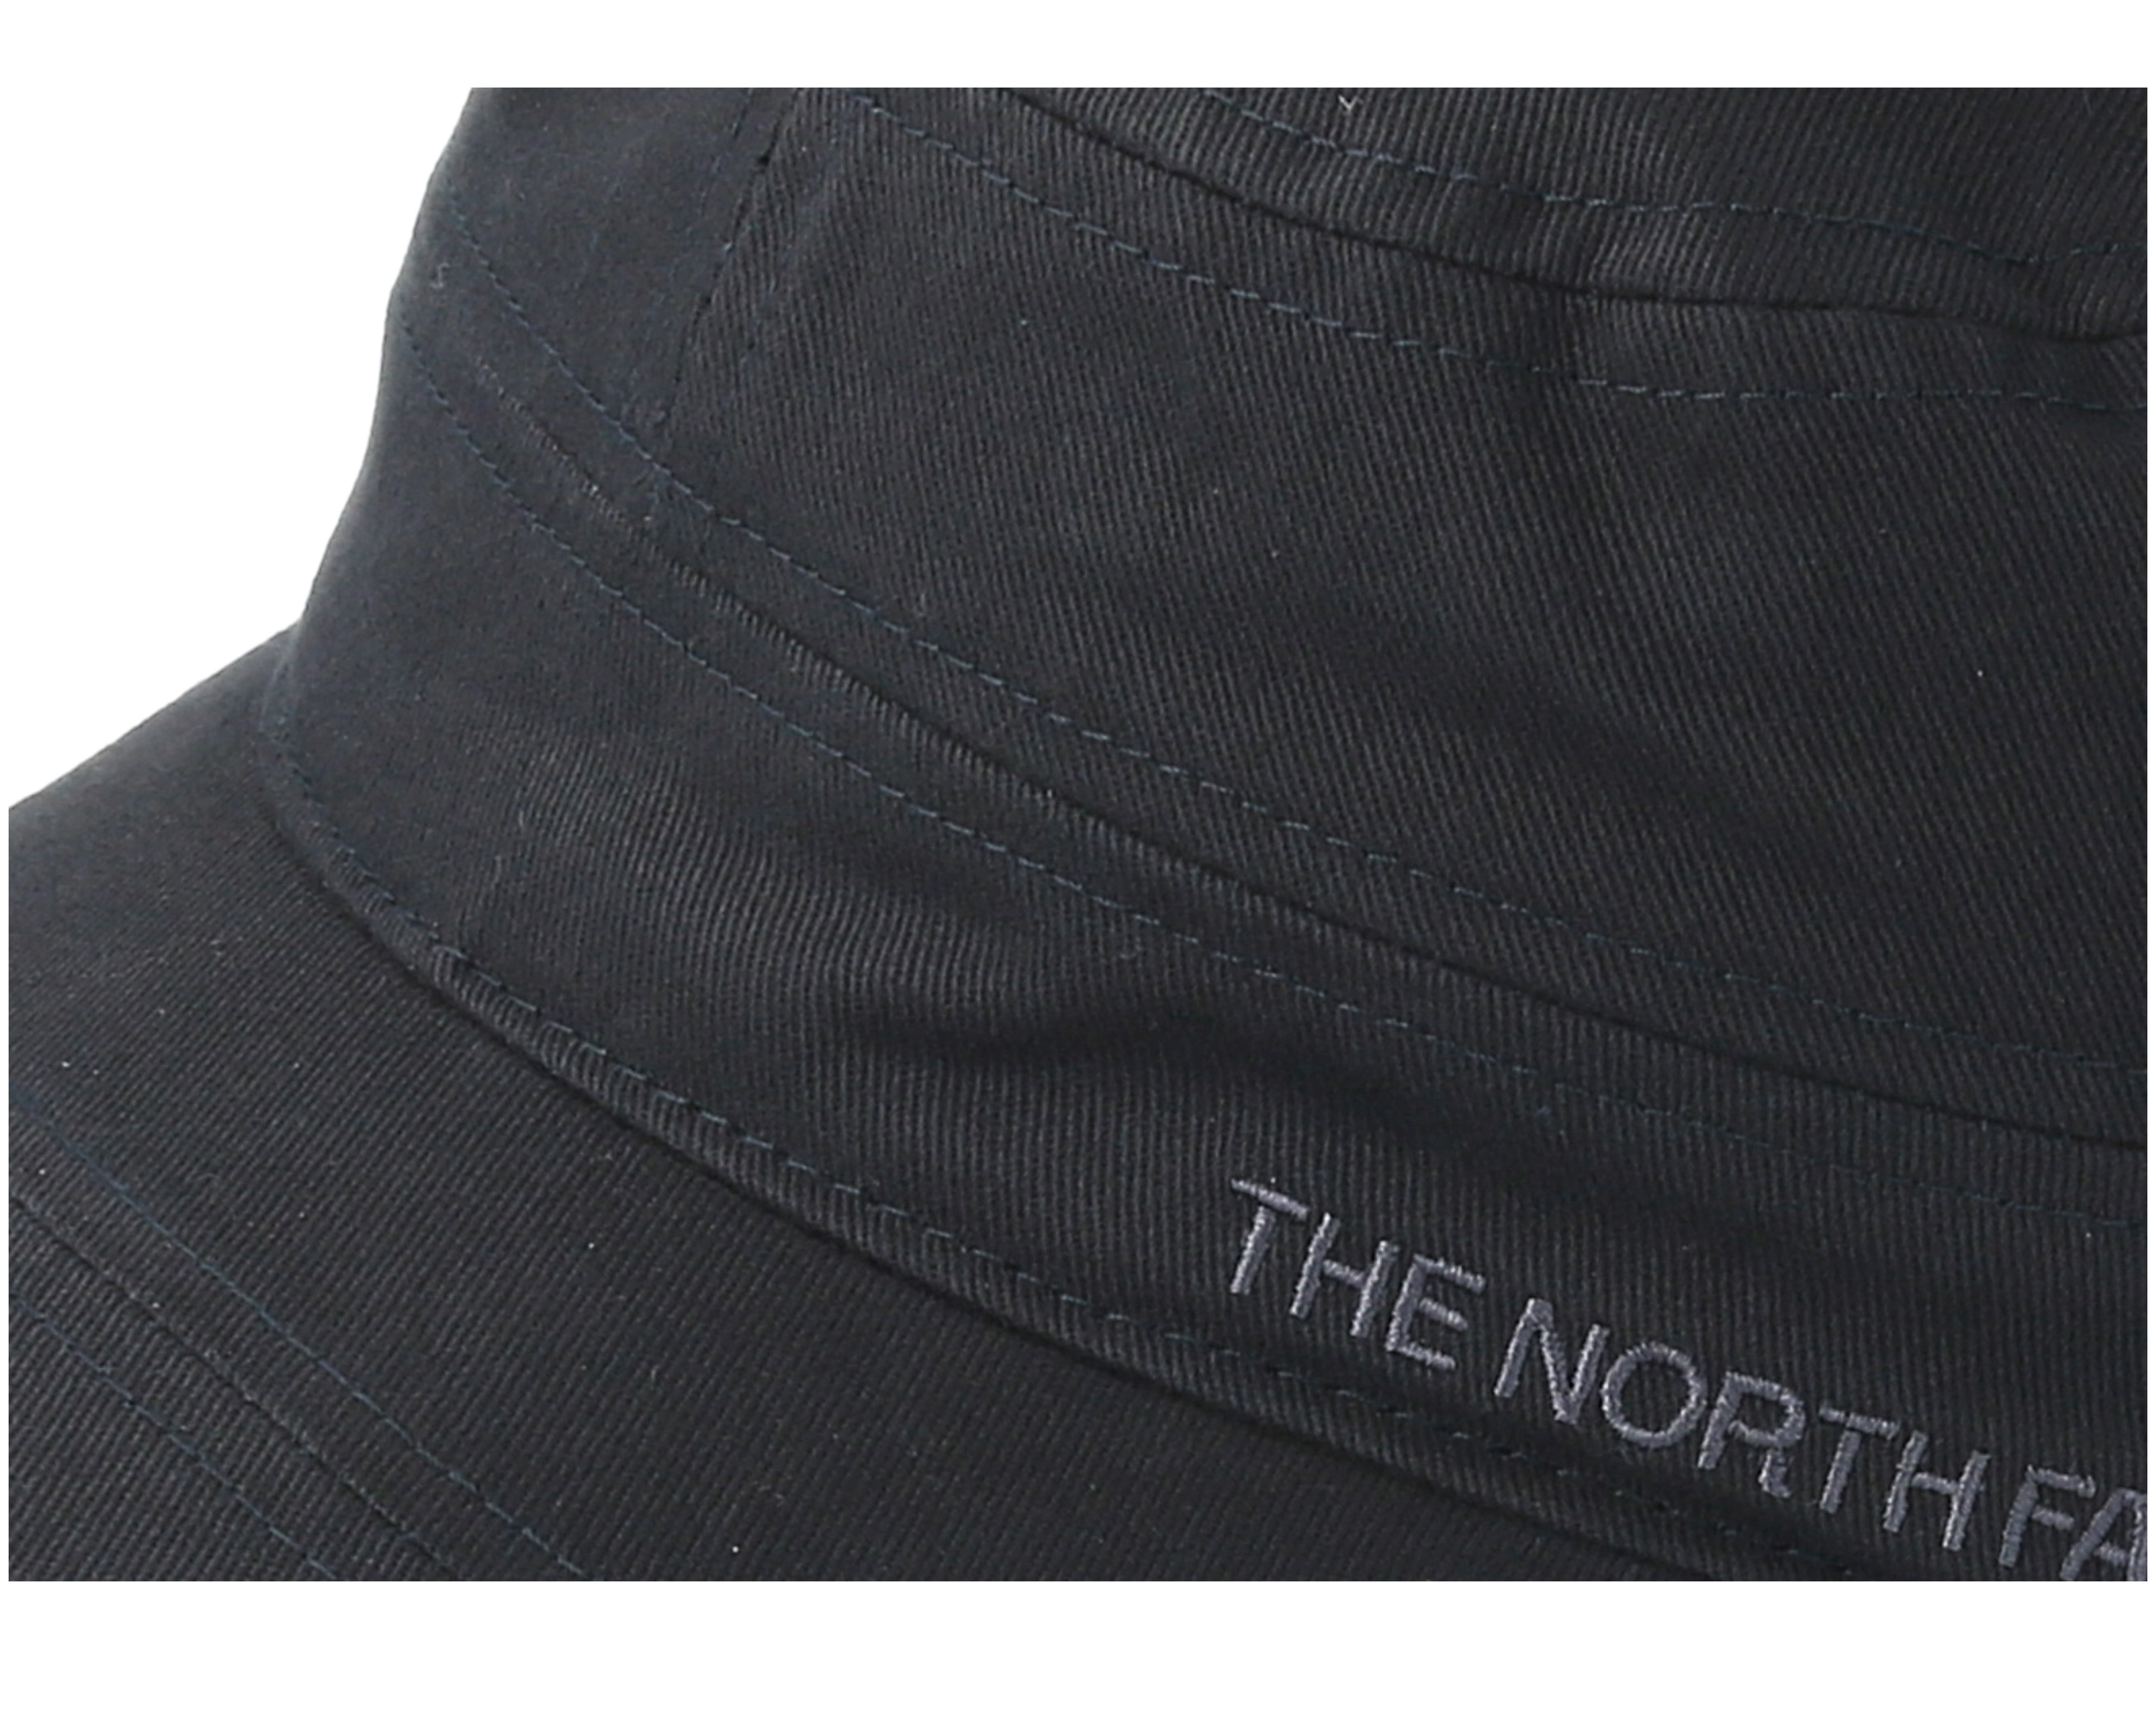 north face military hat